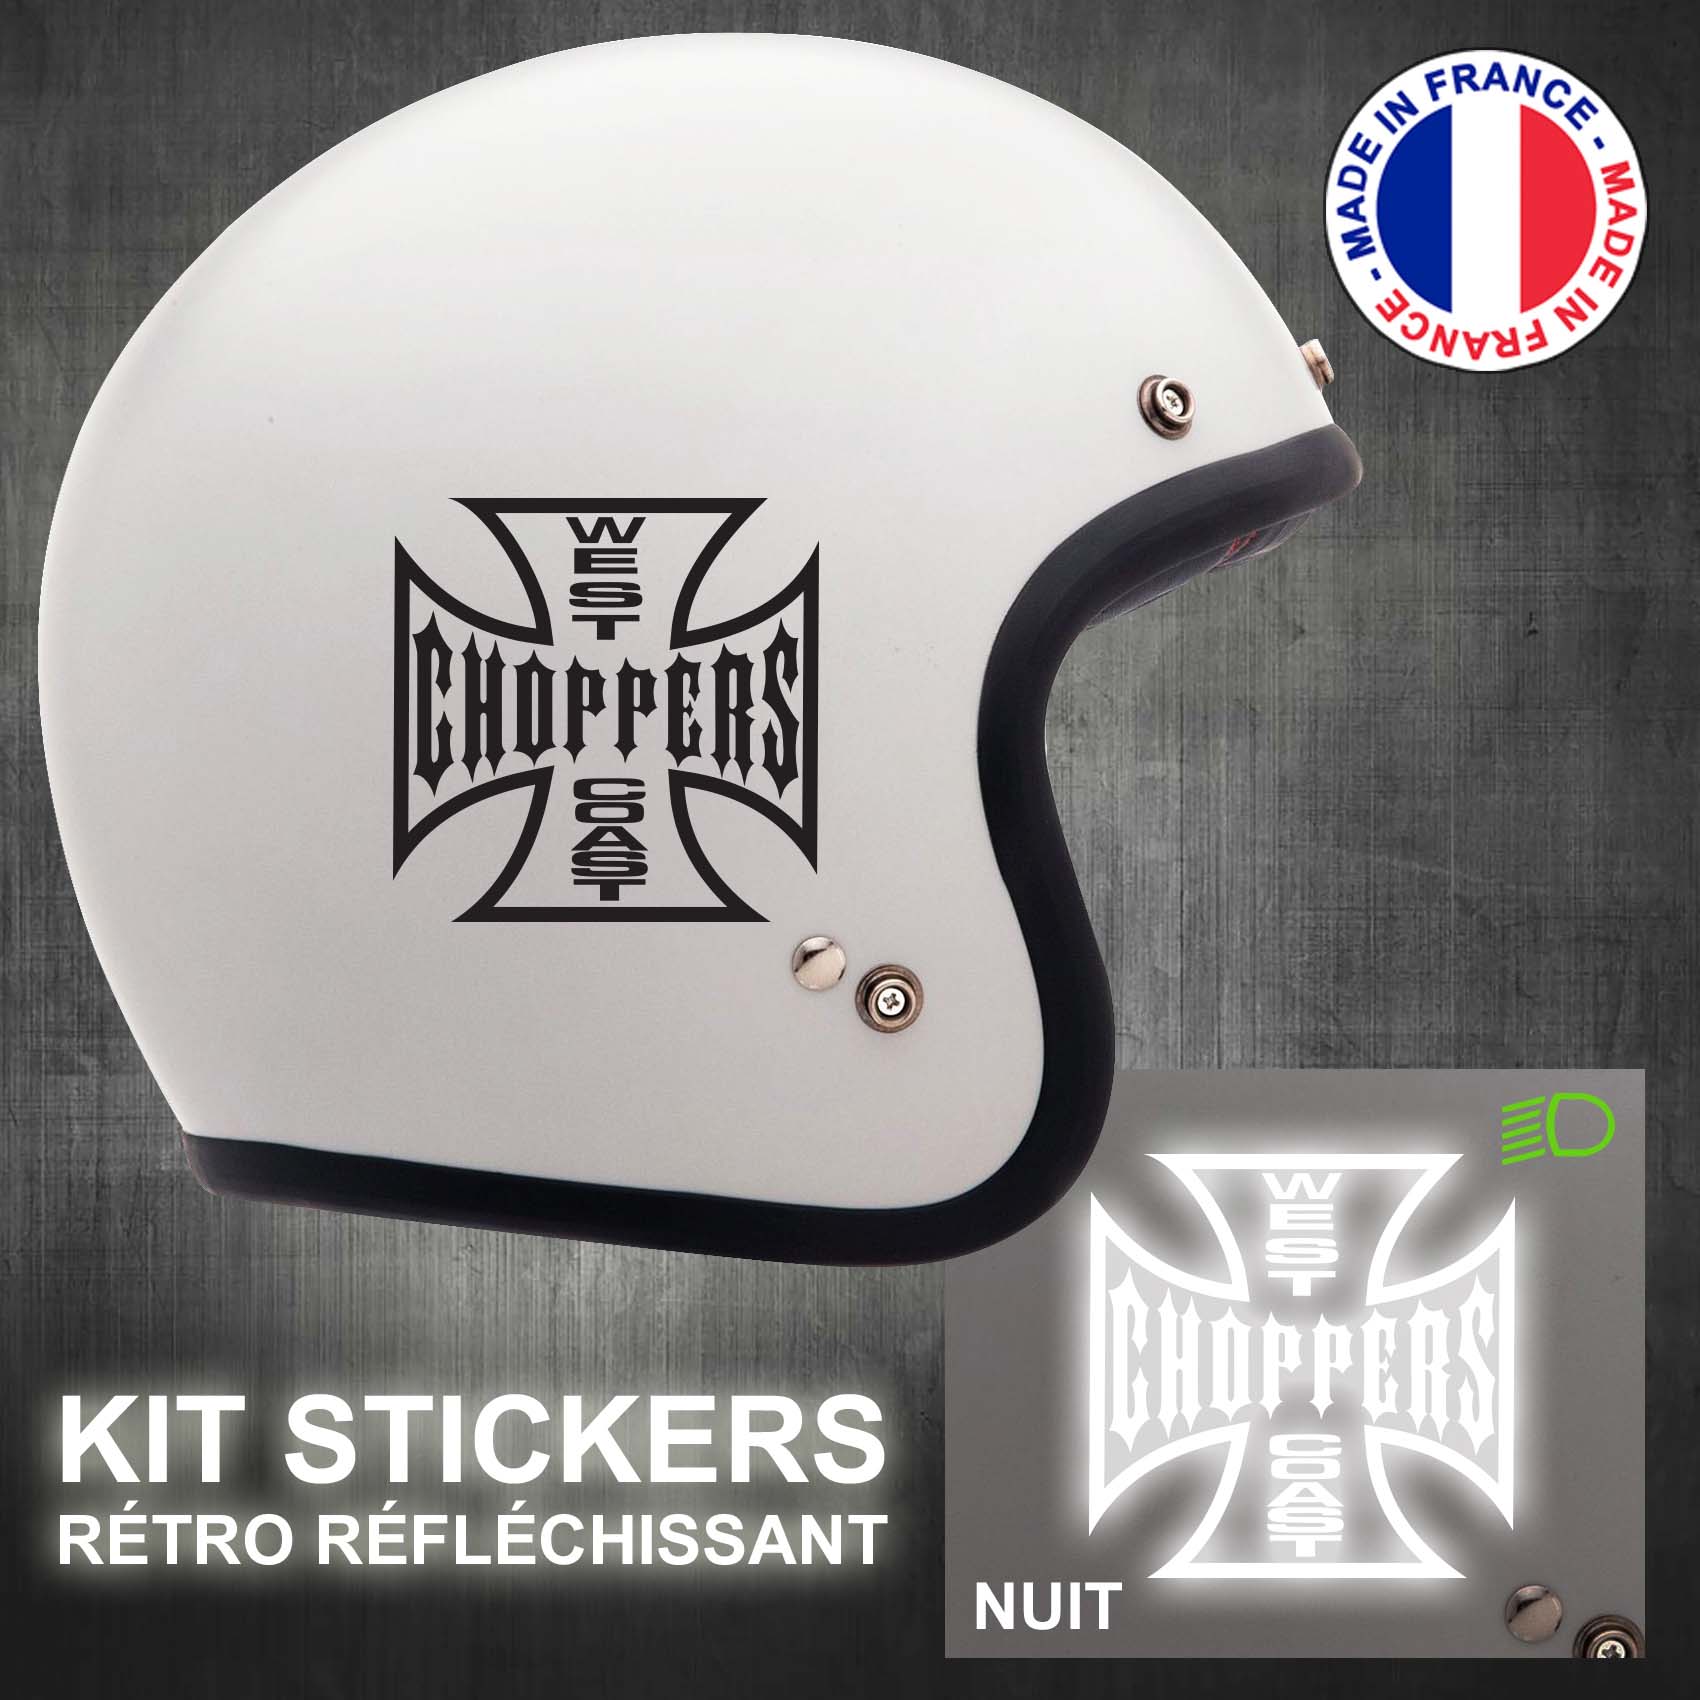 stickers-casque-moto-west-coast-choppers-ref2-retro-reflechissant-autocollant-moto-velo-tuning-racing-route-sticker-casques-adhesif-scooter-nuit-securite-decals-personnalise-personnalisable-